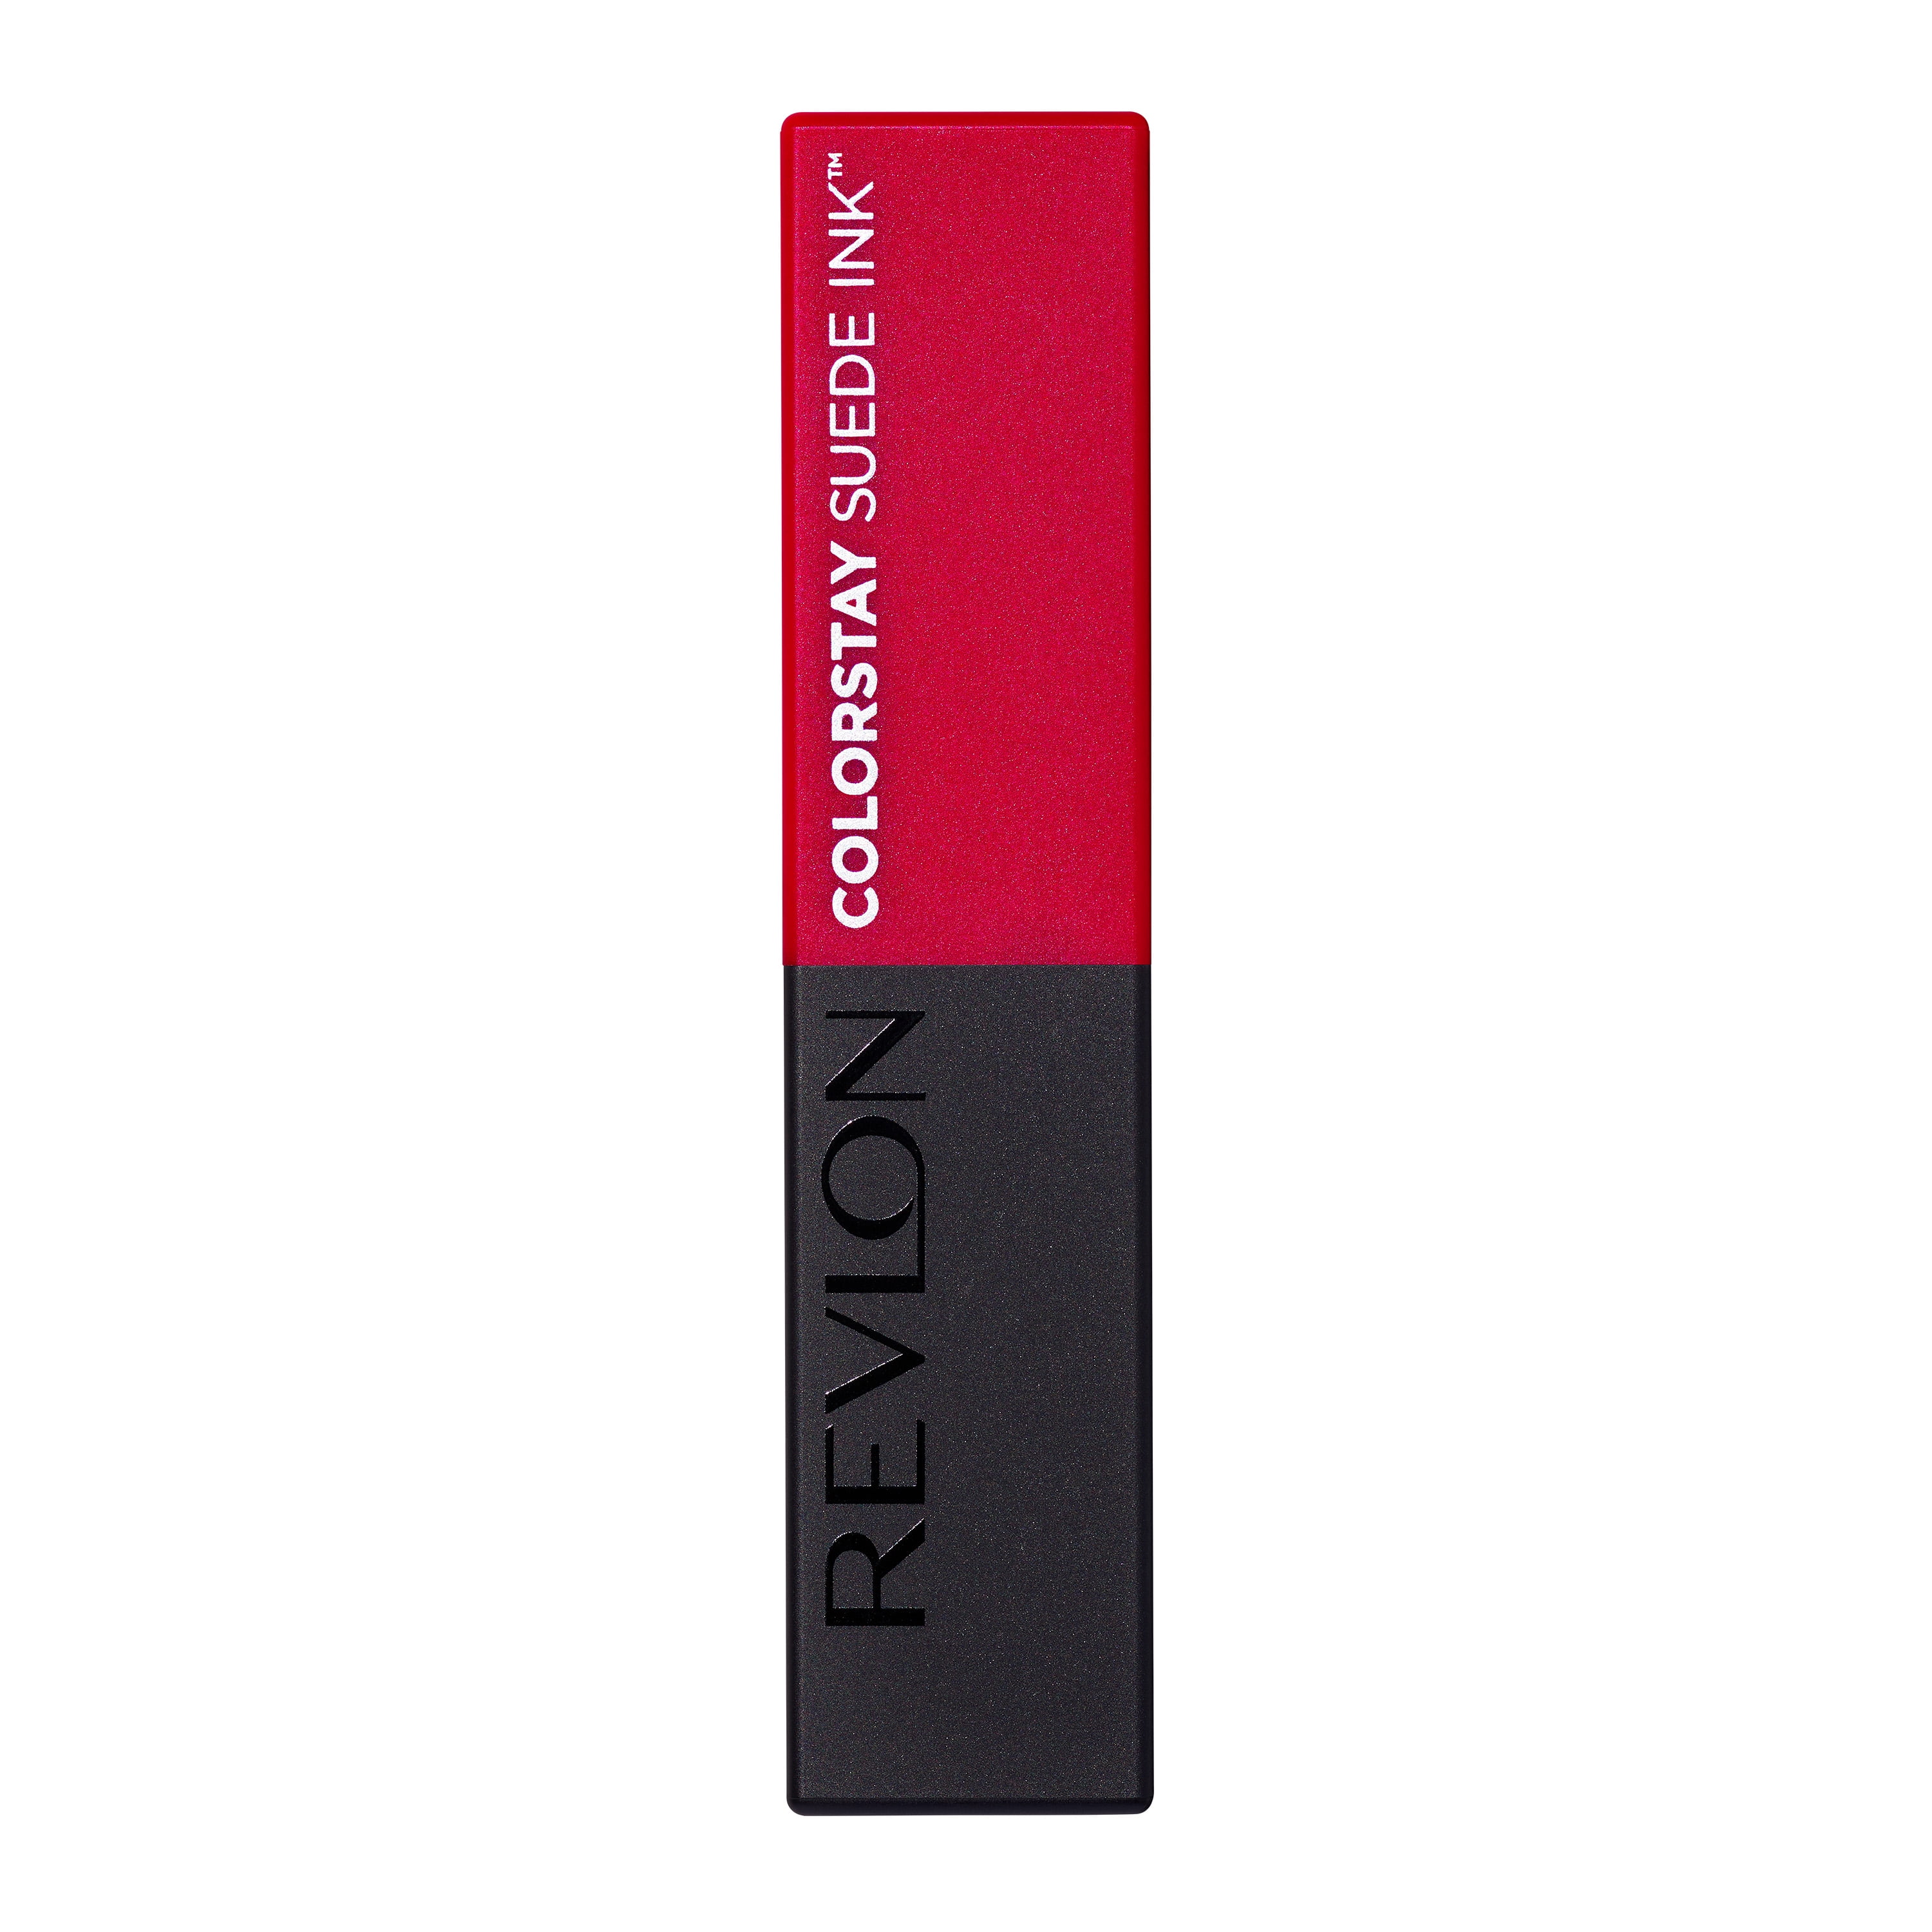 Revlon ColorStay Suede Ink™ Lipstick, 017 First Class, 0.09 oz.